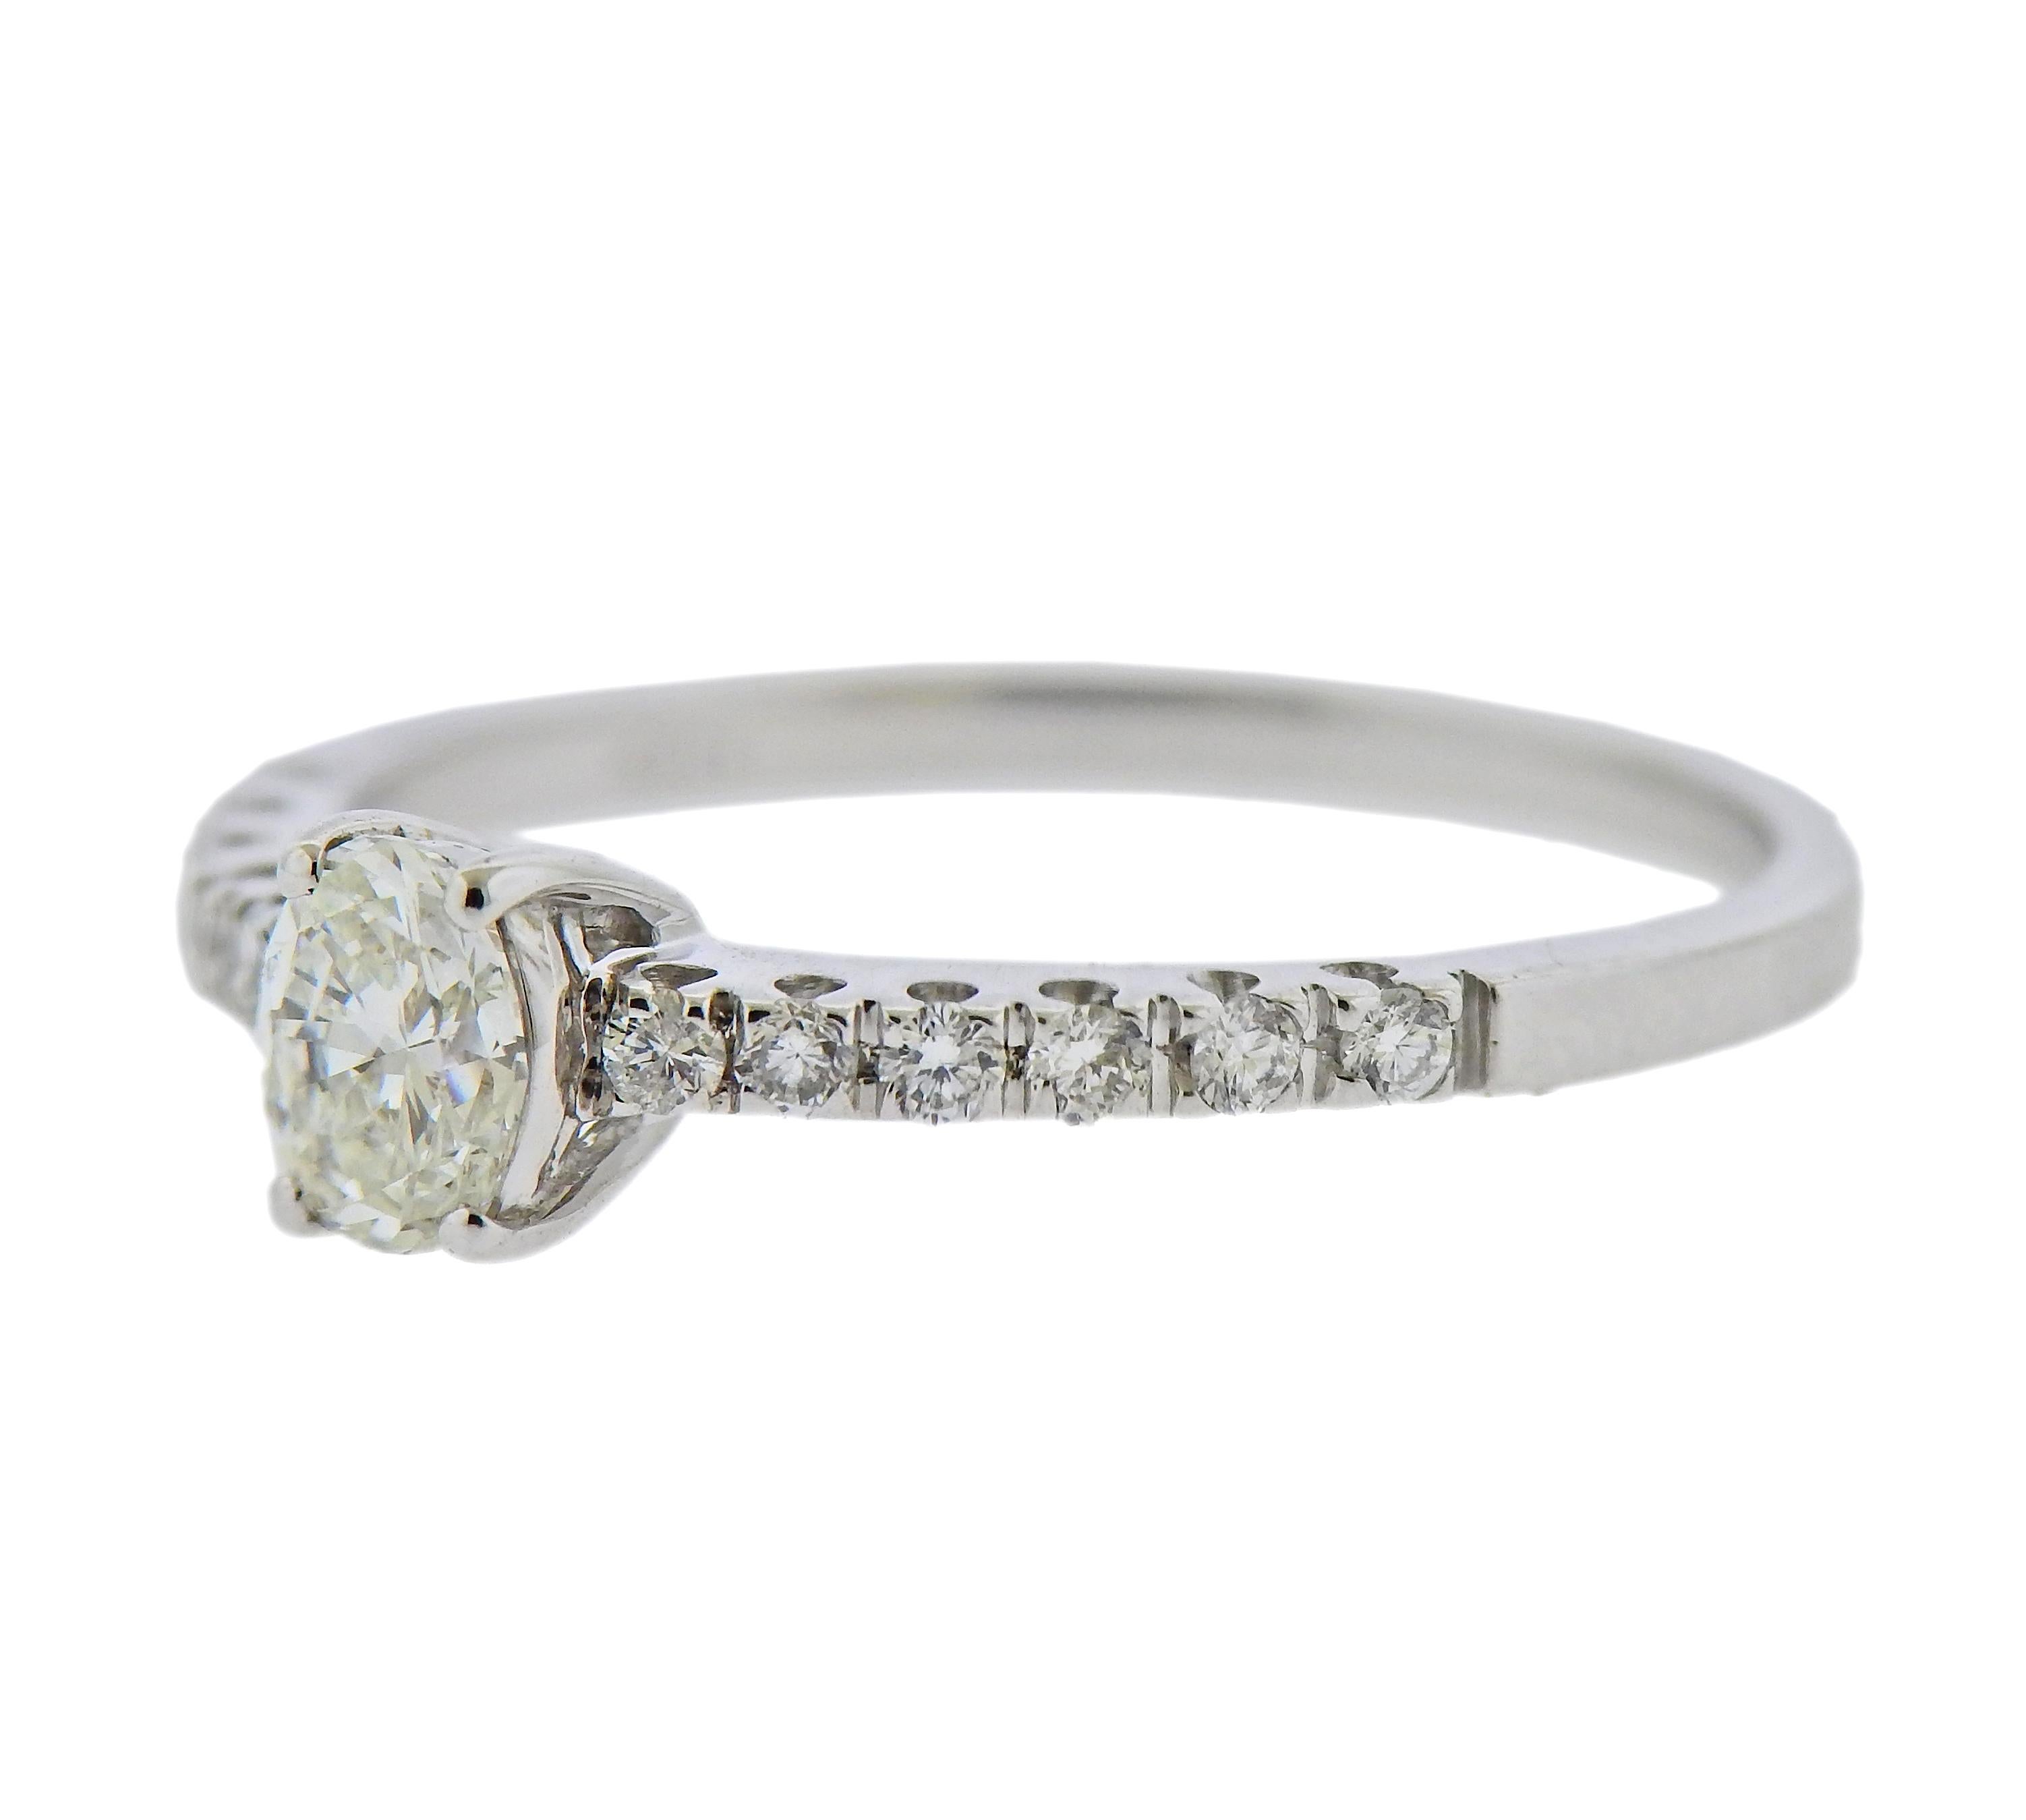 18k white gold engagement ring, with center approx. 0.34ct oval diamond, and size approx. 0.24ctw in diamonds. Ring size - 7. Marked: 750, Italian mark. Weight - 2.4 grams. 